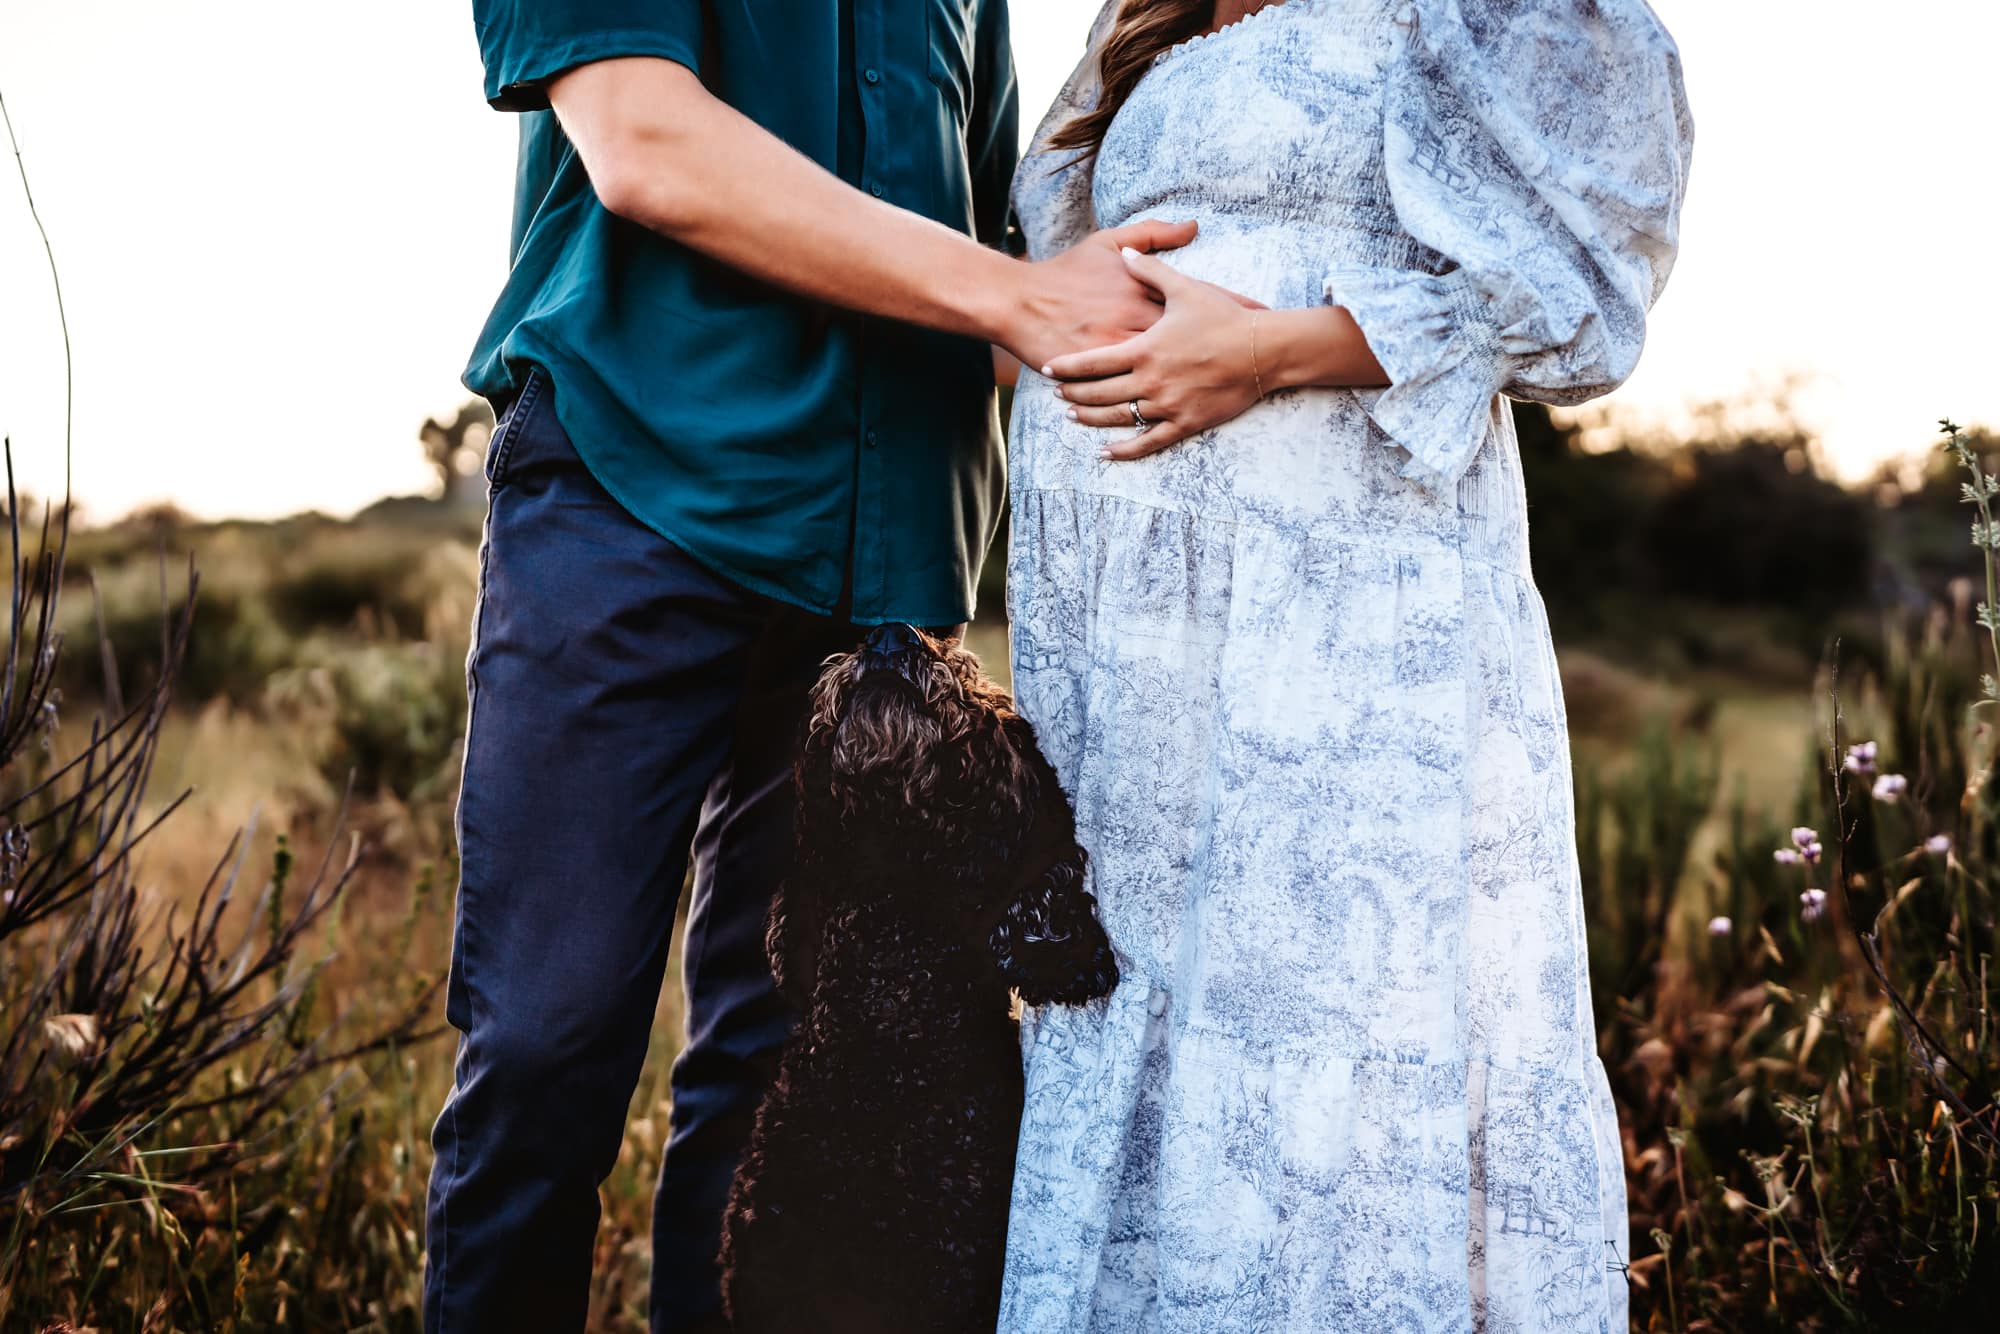 A black dog standing between his owners and looking up at them during a lifestyle San Diego maternity photo session.